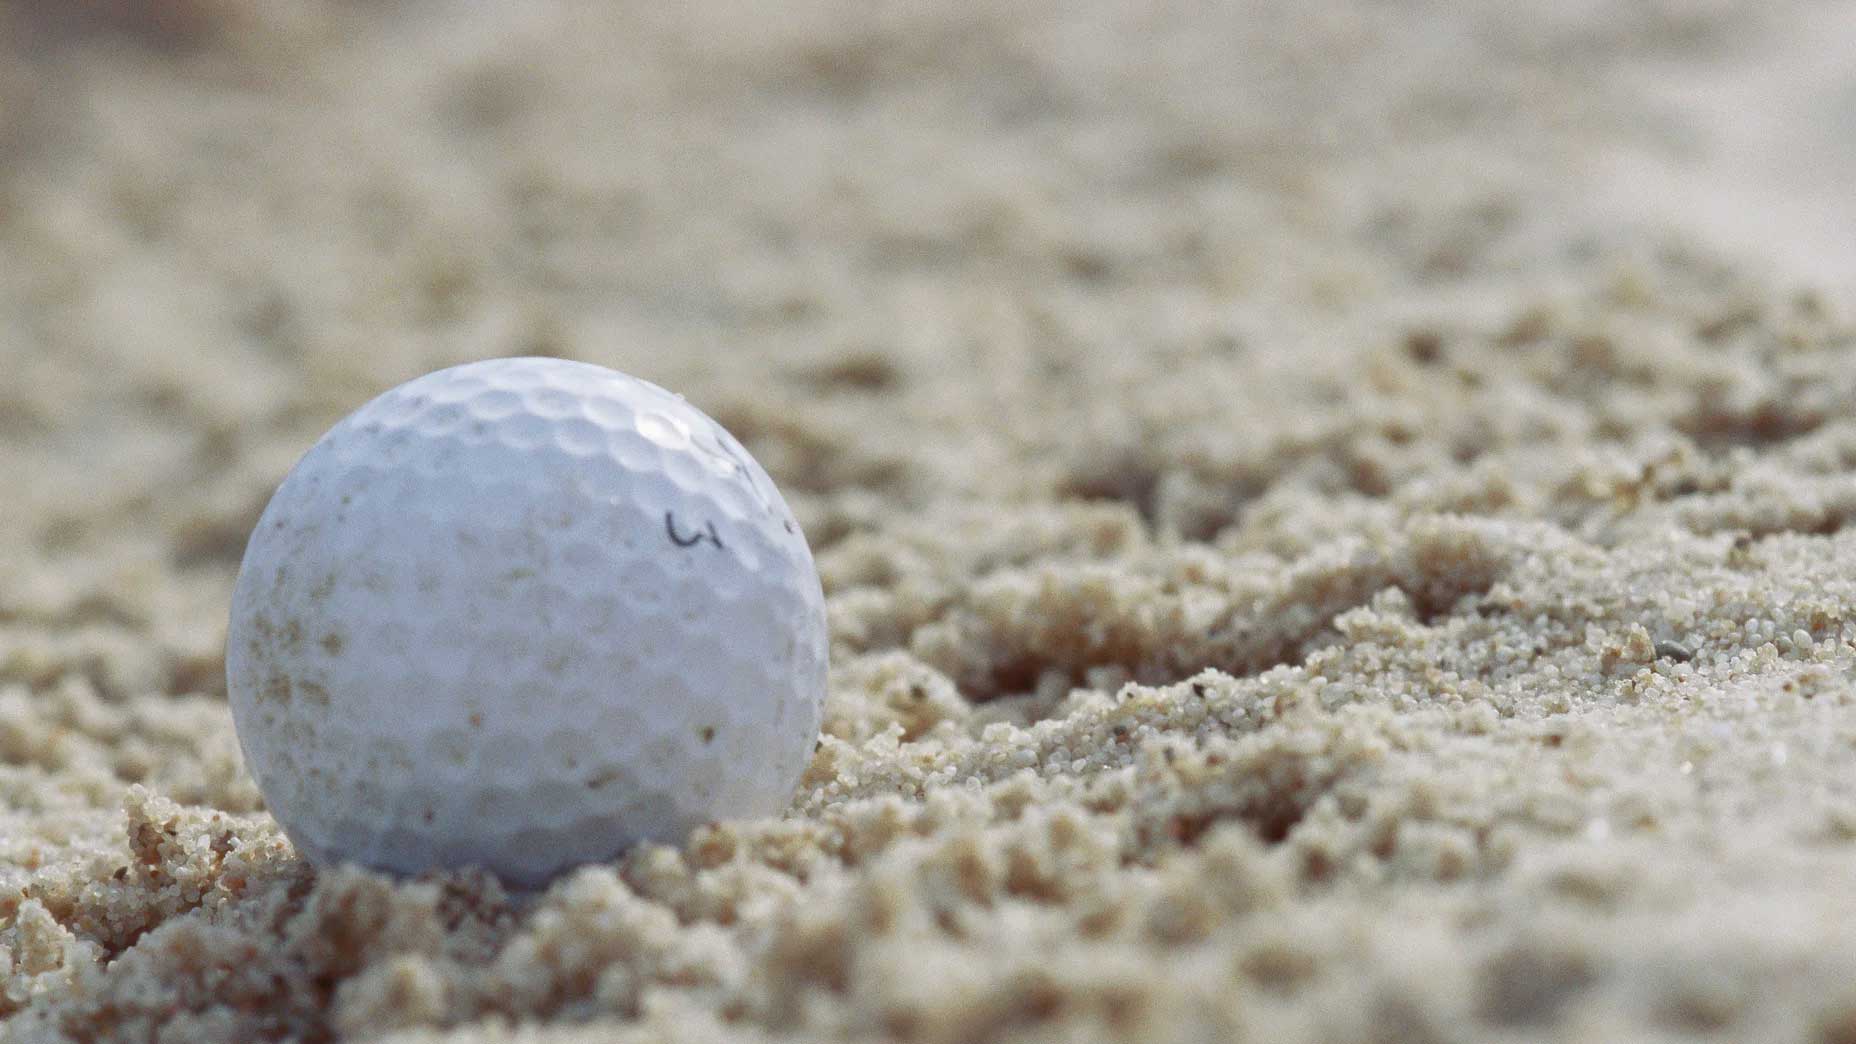 golf ball sitting in sand trap on golf course